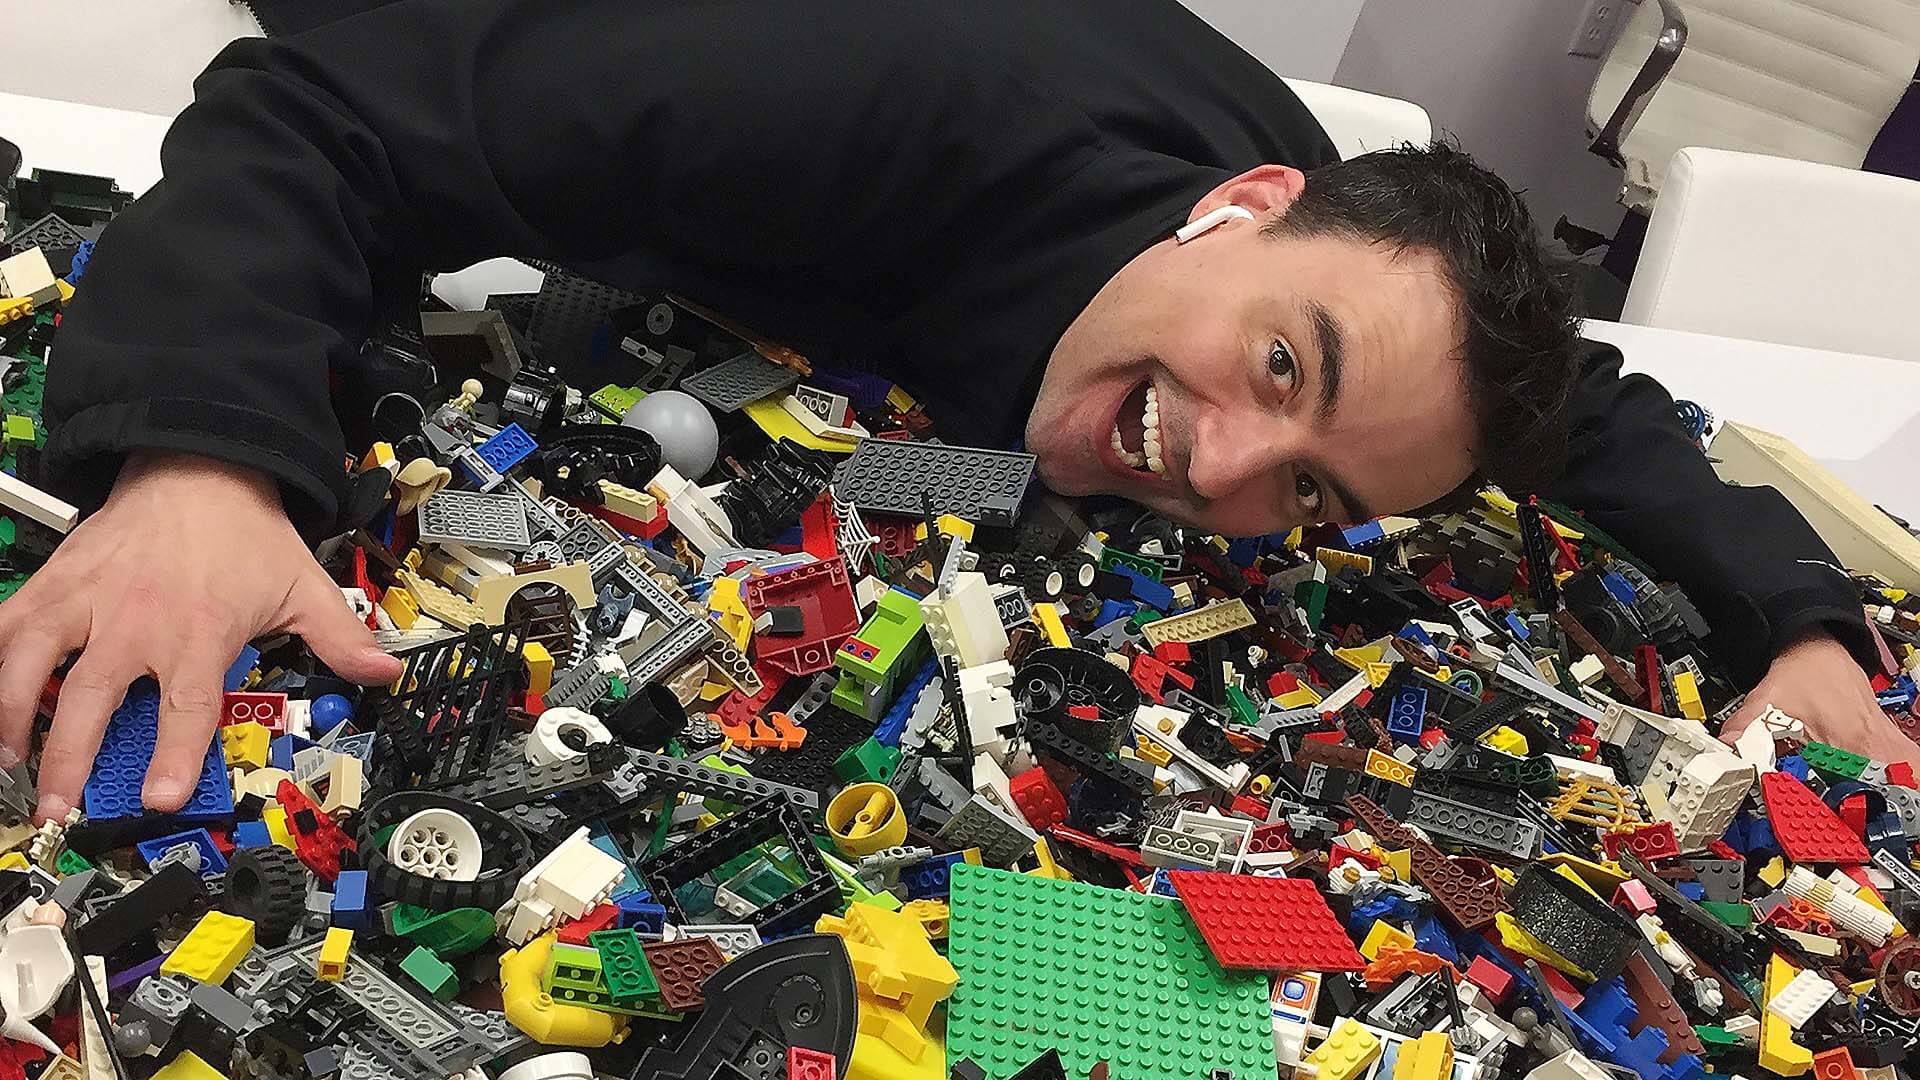 isral Duke leaning over a pile of Legos. He has a large smile and an excited facial expression.